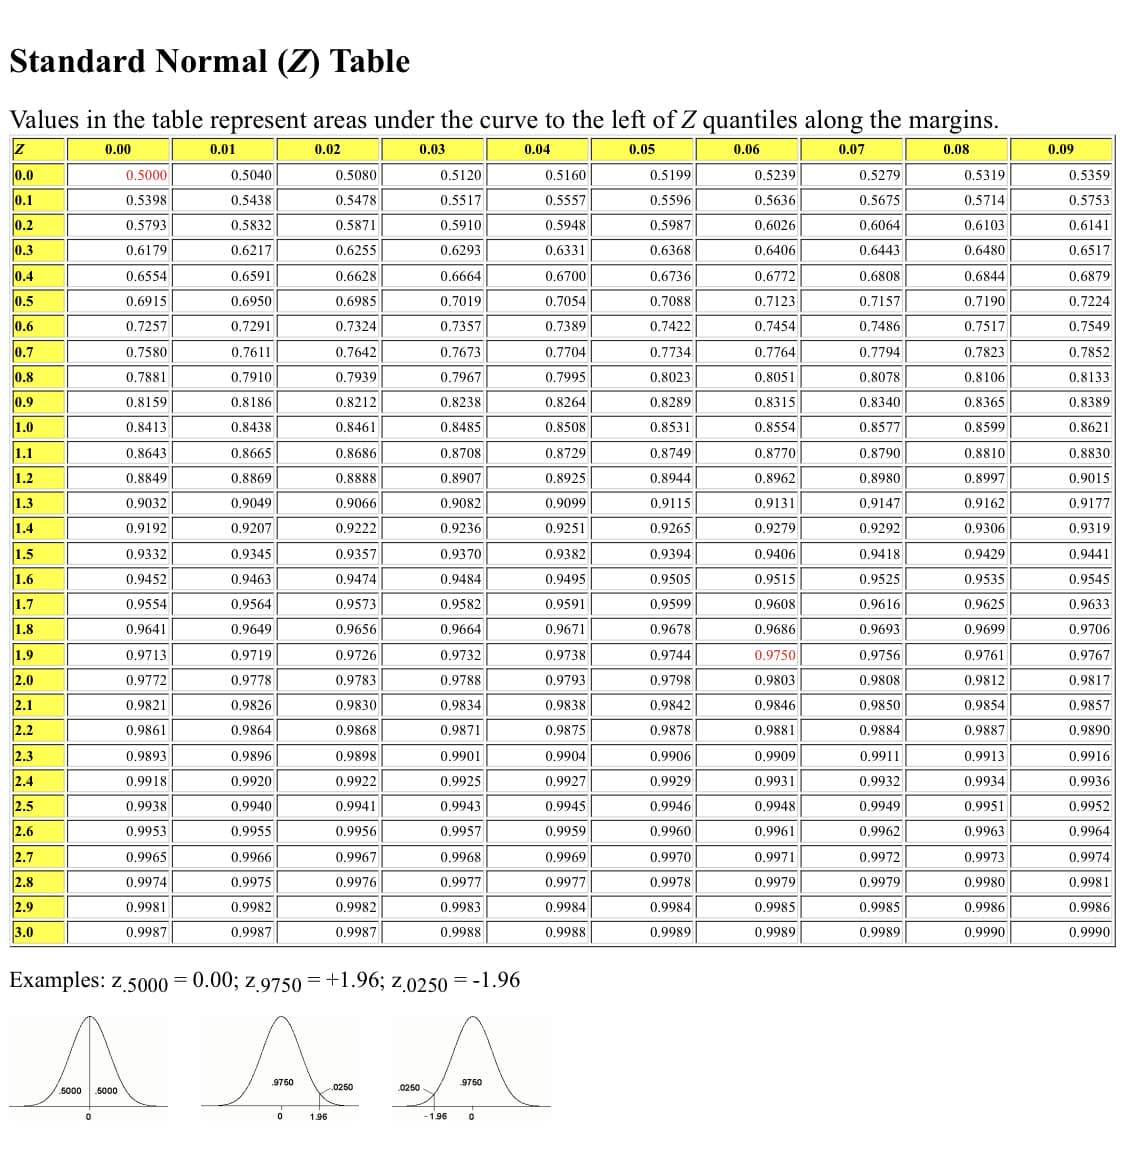 Standard Normal (Z) Table
Values in the table represent areas under the curve to the left of Z quantiles along the margins.
0.00
0.02
0.03
0.04
0.05
0.06
0.07
0.08
Z
0.0
0.1
0.2
0.3
0.4
0.5
0.6
0.7
0.8
0.9
1.0
1.1
1.2
1.3
1.4
1.5
1.6
1.7
1.8
1.9
2.0
2.1
2.2
2.3
2.4
2.5
2.6
2.7
2.8
2.9
3.0
0.5000
0.5398
0.5793
0.6179
0.6554
0.6915
0.7257
0.7580
0.7881
0.8159
0.8413
0.8643
0.8849
0.9032
0.9192
0.9332
0.9452
0.9554
0.9641
0.9713
0.9772
0.9821
0.9861
0.9893
0.9918
0.9938
0.9953
0.9965
0.9974
0.9981
0.9987
0.01
0.5040
0.5438
0.5832
0.6217
0.6591
0.6950
0.7291
0.7611
0.7910
0.8186
0.8438
0.8665
0.8869
0.9049
0.9207
0.9345
0.9463
0.9564
0.9649
0.9719
0.9778
0.9826
0.9864
0.9896
0.9920
0.9940
0.9955
0.9966
0.9975
0.9982
0.9987
.9750
0
0.5080
0.5478
0.5871
0.6255
0.6628
0.6985
0.7324
0.7642
0.7939
0.8212
0.8461
0.8686
0.8888
0.9066
0.9222
0.9357
0.9474
0.9573
0.9656
0.9726
0.9783
0.9830
0.9868
0.9898
0.9922
0.9941
Examples: z.5000=0.00; z.9750=+1.96; Z.0250 = -1.96
A
5000
5000
1.96
0.9956
0.9967
0.9976
0.9982
0.9987
0250
0.5120
0.5517
0.5910
0.6293
0.6664
0.7019
0.7357
0.7673
0.7967
0.8238
0.8485
0.8708
0.8907
0.9082
0.9236
0.9370
0.9484
0.9582
0.9664
0.9732
0.9788
0.9834
0.9871
0.9901
0.9925
0.9943
0.9957
0.9968
0.9977
0.9983
0.9988
0250
-1.96
9750
0
0.5160
0.5557
0.5948
0.6331
0.6700
0.7054
0.7389
0.7704
0.7995
0.8264
0.8508
0.8729
0.8925
0.9099
0.9251
0.9382
0.9495
0.9591
0.9671
0.9738
0.9793
0.9838
0.9875
0.9904
0.9927
0.9945
0.9959
0.9969
0.9977
0.9984
0.9988
0.5199
0.5596
0.5987
0.6368
0.6736
0.7088
0.7422
0.7734
0.8023
0.8289
0.8531
0.8749
0.8944
0.9115
0.9265
0.9394
0.9505
0.9599
0.9678
0.9744
0.9798
0.9842
0.9878
0.9906
0.9929
0.9946
0.9960
0.9970
0.9978
0.9984
0.9989
0.5239
0.5636
0.6026
0.6406
0.6772
0.7123
0.7454
0.7764
0.8051
0.8315
0.8554
0.8770
0.8962
0.9131
0.9279
0.9406
0.9515
0.9608
0.9686
0.9750
0.9803
0.9846
0.9881
0.9909
0.9931
0.9948
0.9961
0.9971
0.9979
0.9985
0.9989
0.5279
0.5675
0.6064
0.6443
0.6808
0.7157
0.7486
0.7794
0.8078
0.8340
0.8577
0.8790
0.8980
0.9147
0.9292
0.9418
0.9525
0.9616
0.9693
0.9756
0.9808
0.9850
0.9884
0.9911
0.9932
0.9949
0.9962
0.9972
0.9979
0.9985
0.9989
0.5319
0.5714
0.6103
0.6480
0.6844
0.7190
0.7517
0.7823
0.8106
0.8365
0.8599
0.8810
0.8997
0.9162
0.9306
0.9429
0.9535
0.9625
0.9699
0.9761
0.9812
0.9854
0.9887
0.9913
0.9934
0.9951
0.9963
0.9973
0.9980
0.9986
0.9990
0.09
0.5359
0.5753
0.6141
0.6517
0.6879
0.7224
0.7549
0.7852
0.8133
0.8389
0.8621
0.8830
0.9015
0.9177
0.9319
0.9441
0.9545
0.9633
0.9706
0.9767
0.9817
0.9857
0.9890
0.9916
0.9936
0.9952
0.9964
0.9974
0.9981
0.9986
0.9990